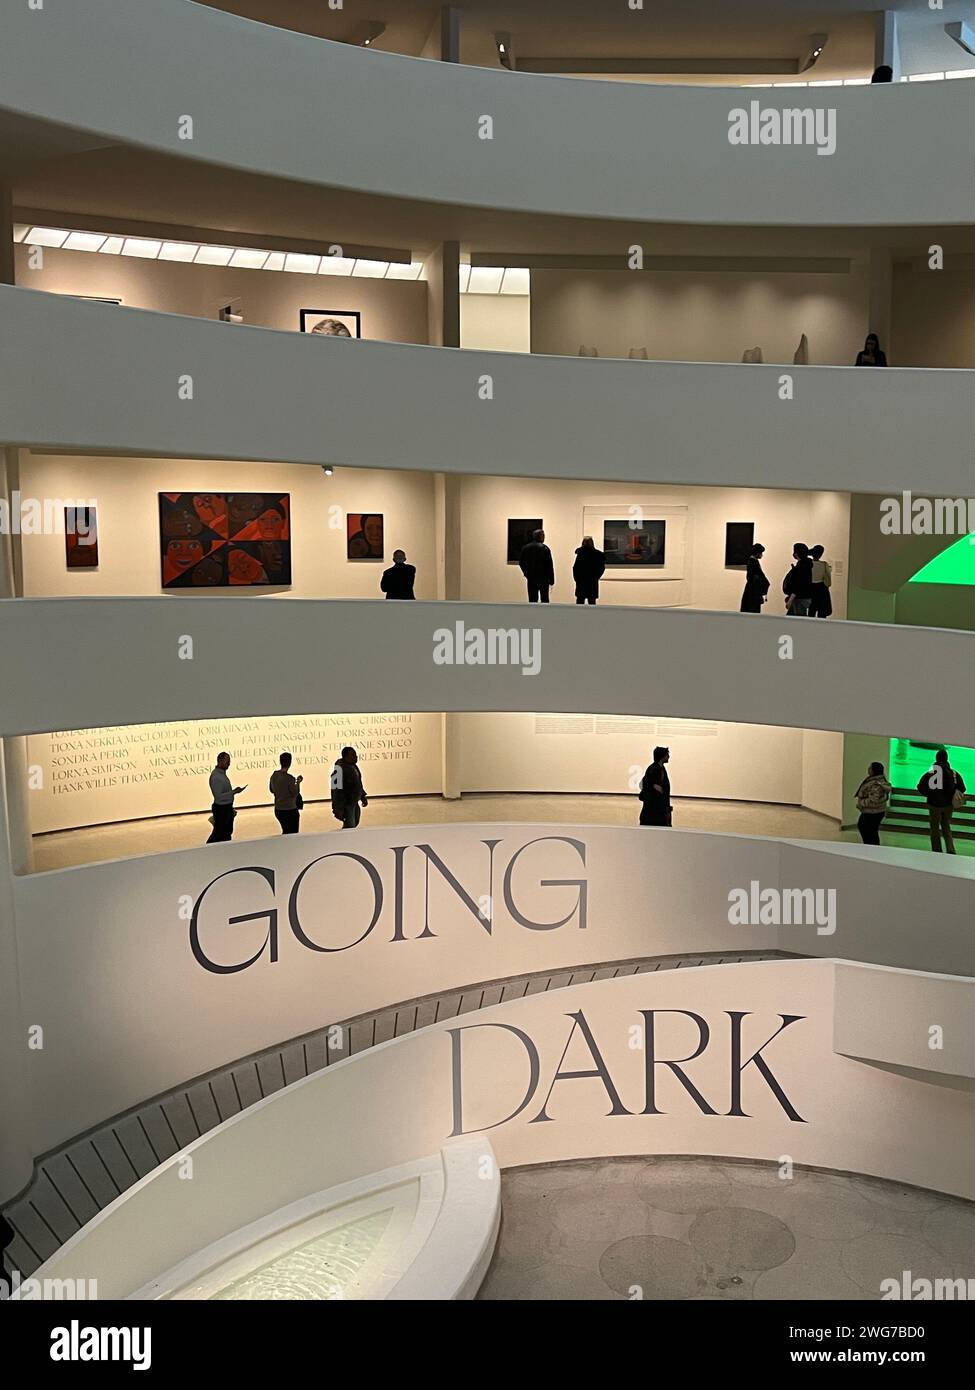 Going Dark: The Contemporary Figure at the Edge of Visibility presents works of art that feature partially obscured or hidden figures, thus positioning them at the “edge of visibility.” Guggenheim Museum in New York City. Stock Photo